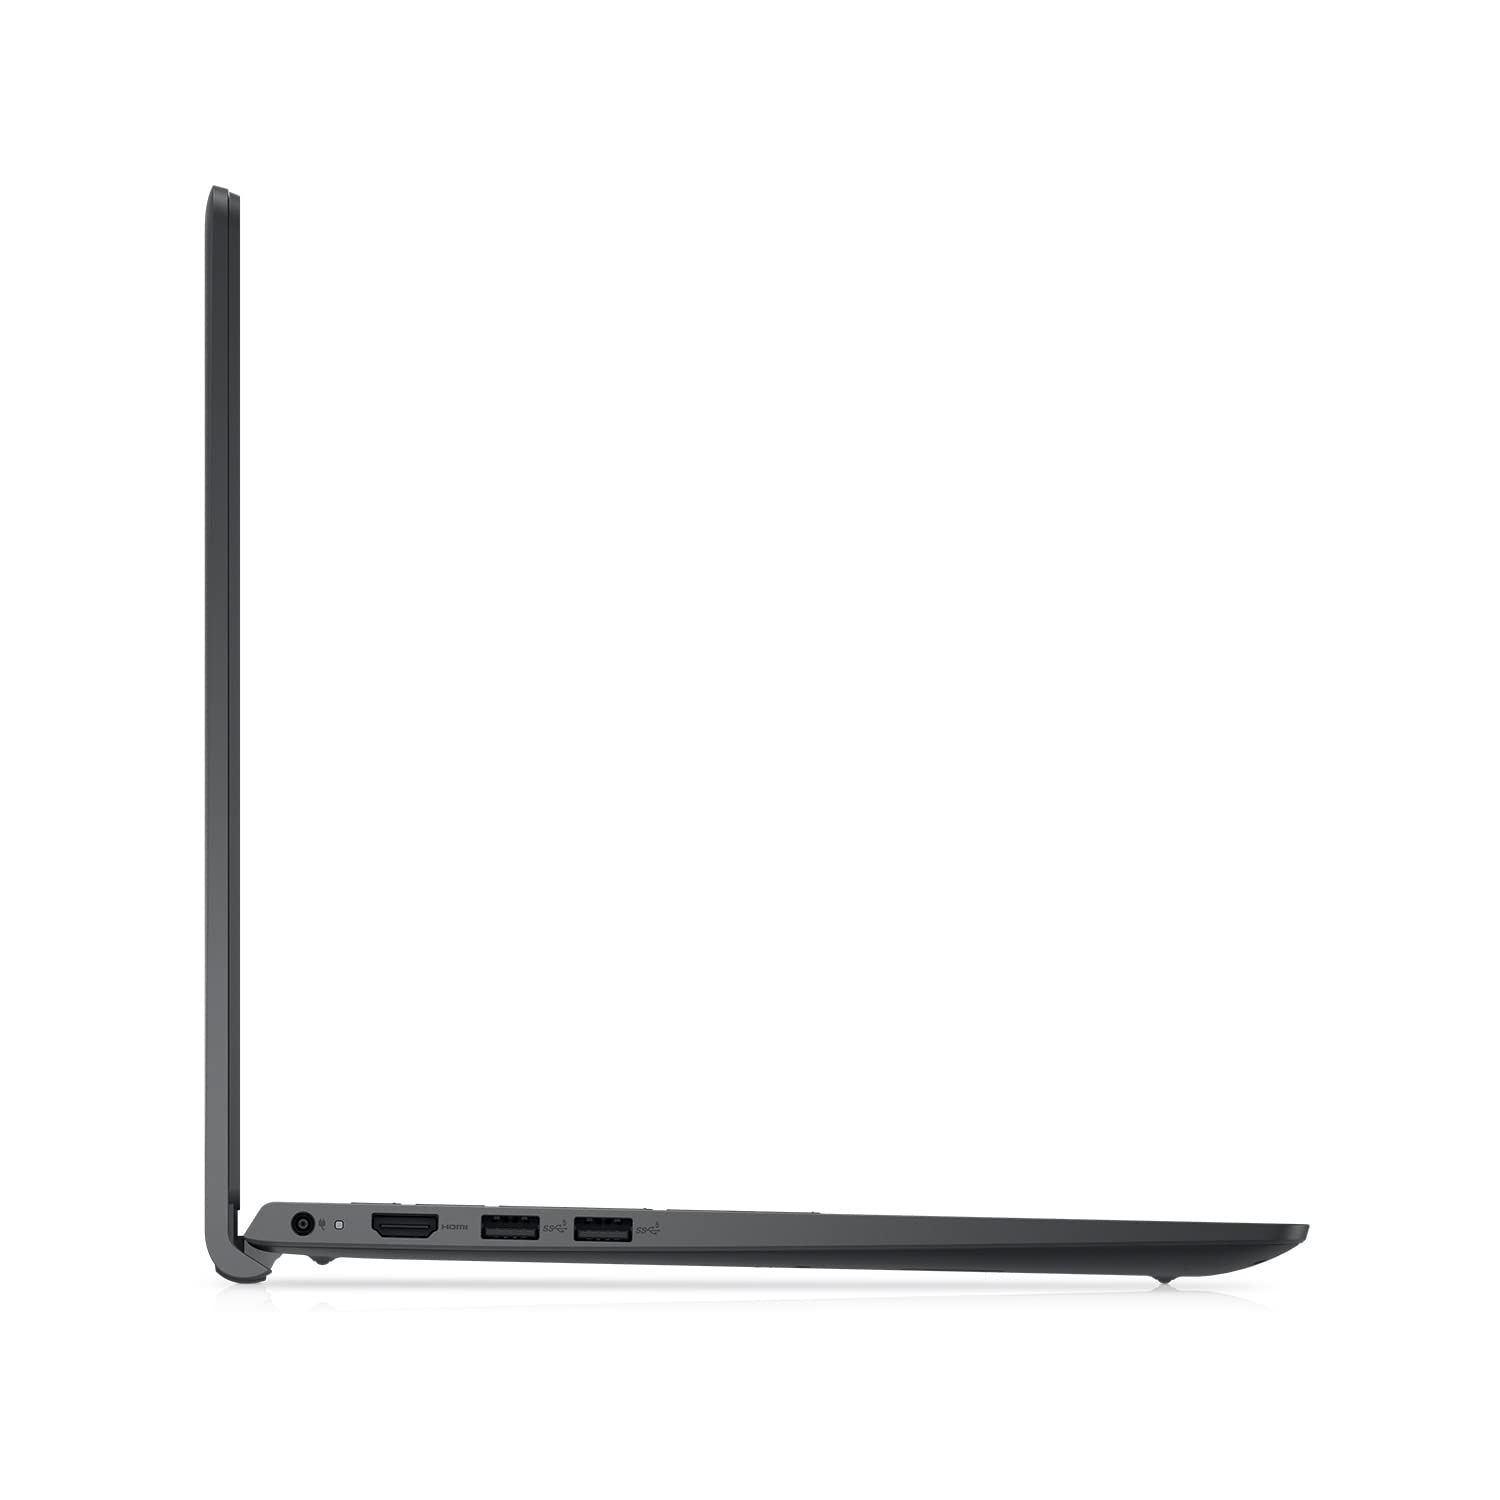 2022 Newest Dell Inspiron 3511 Laptop, 15.6